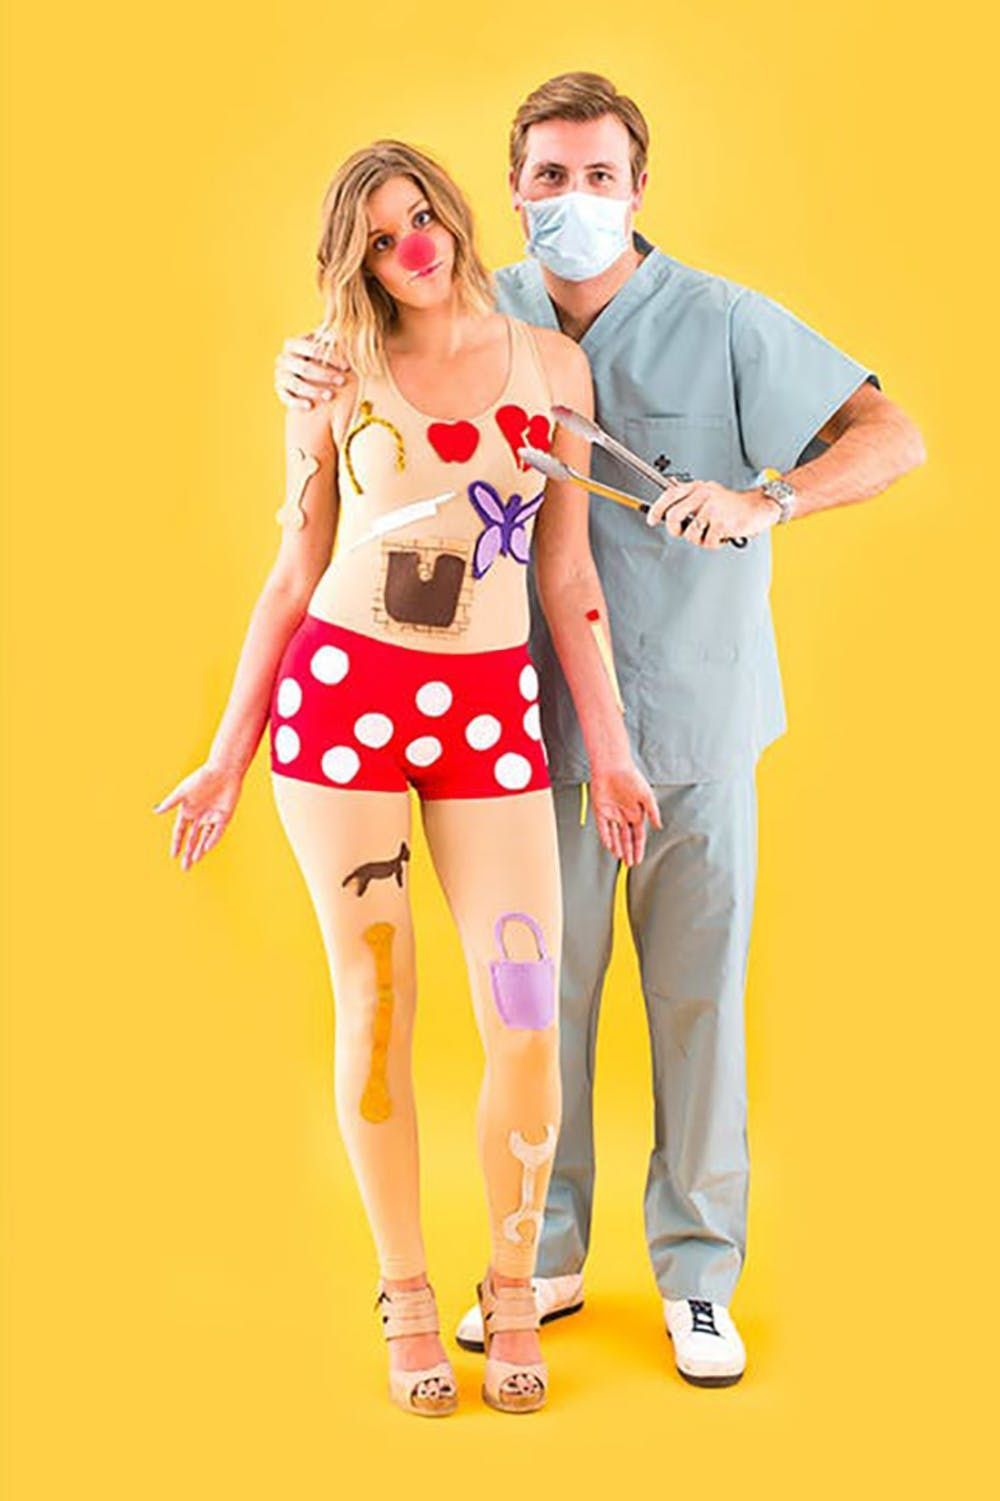 home made costume ideas sexy Sex Images Hq